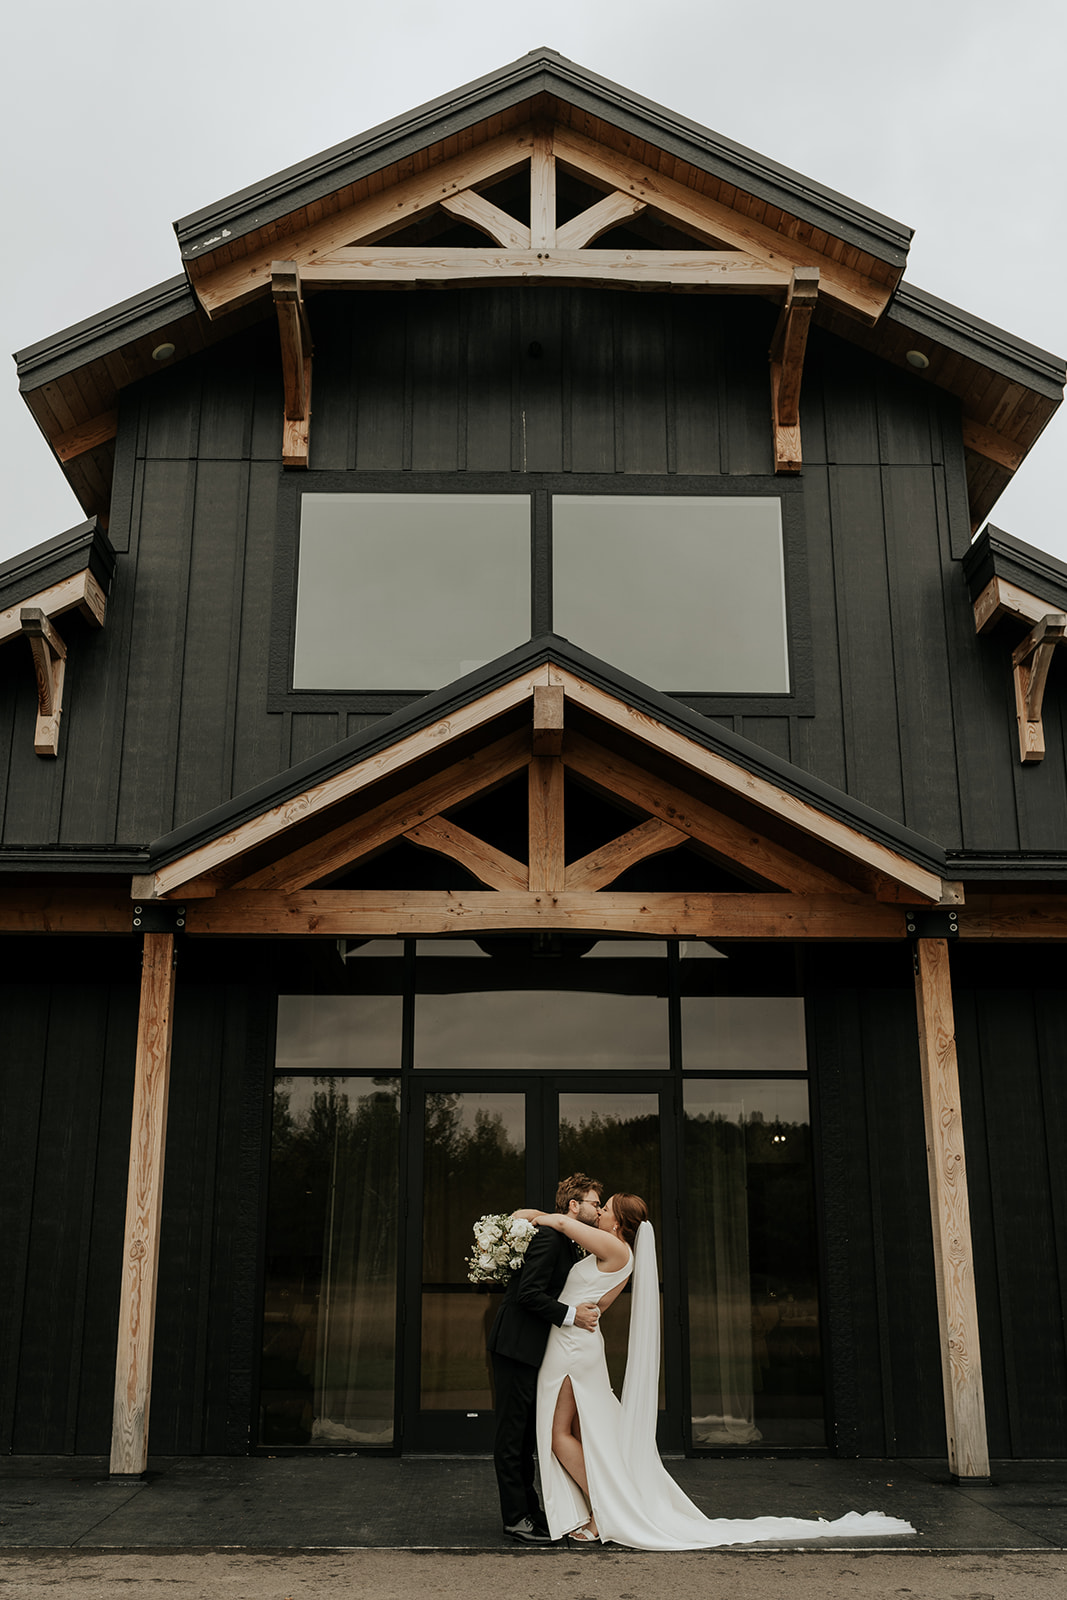 Exterior view of a modern wedding venue black wooden barn-style house with large windows, surrounded by a grassy lawn and overcast sky. Thus venue is called Ivy Black